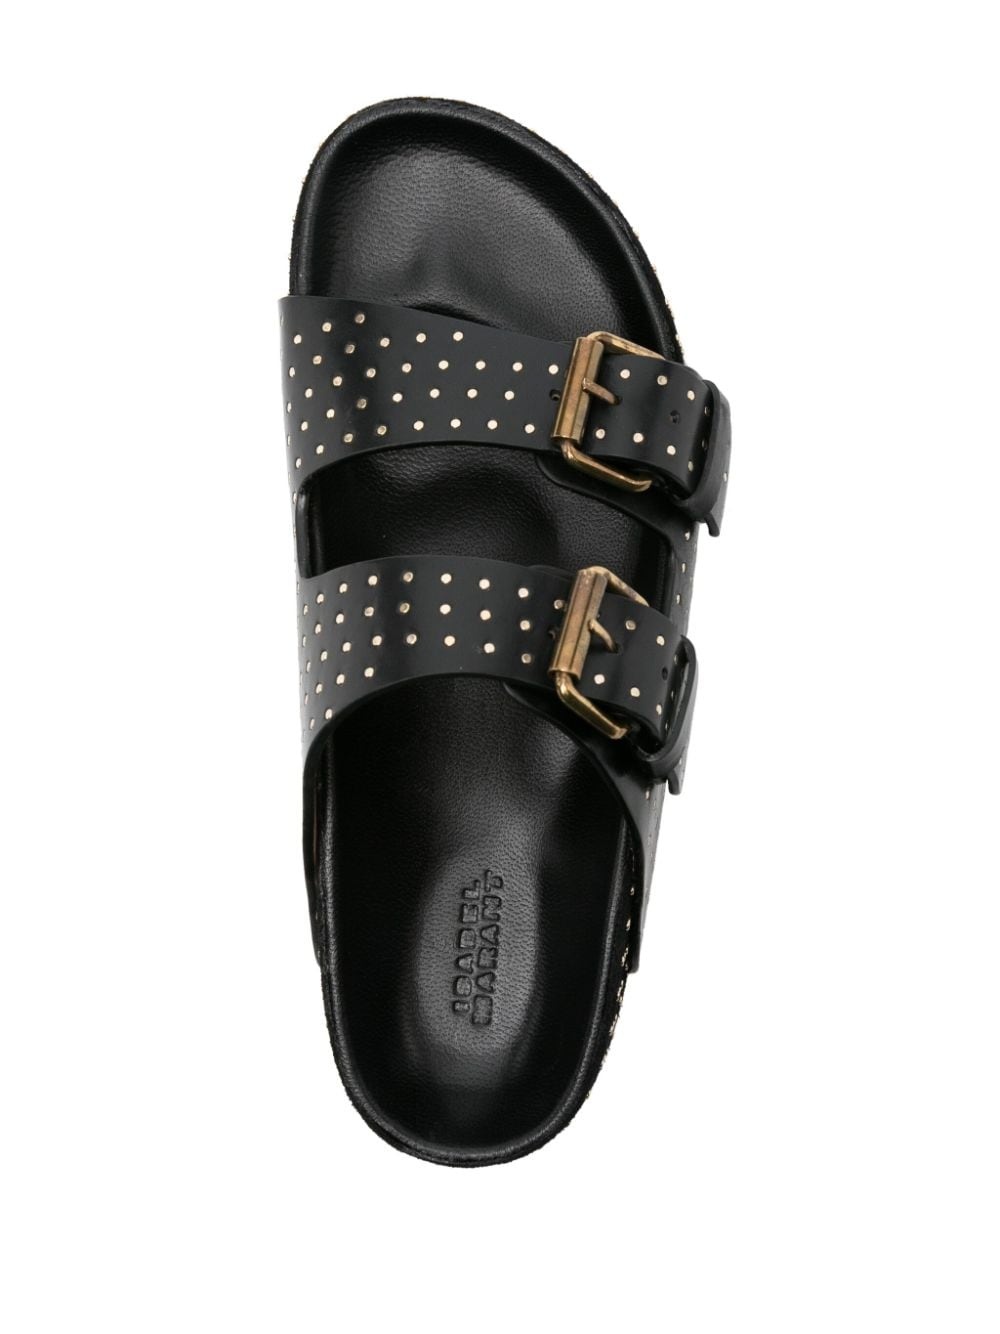 studded leather sandals - 4